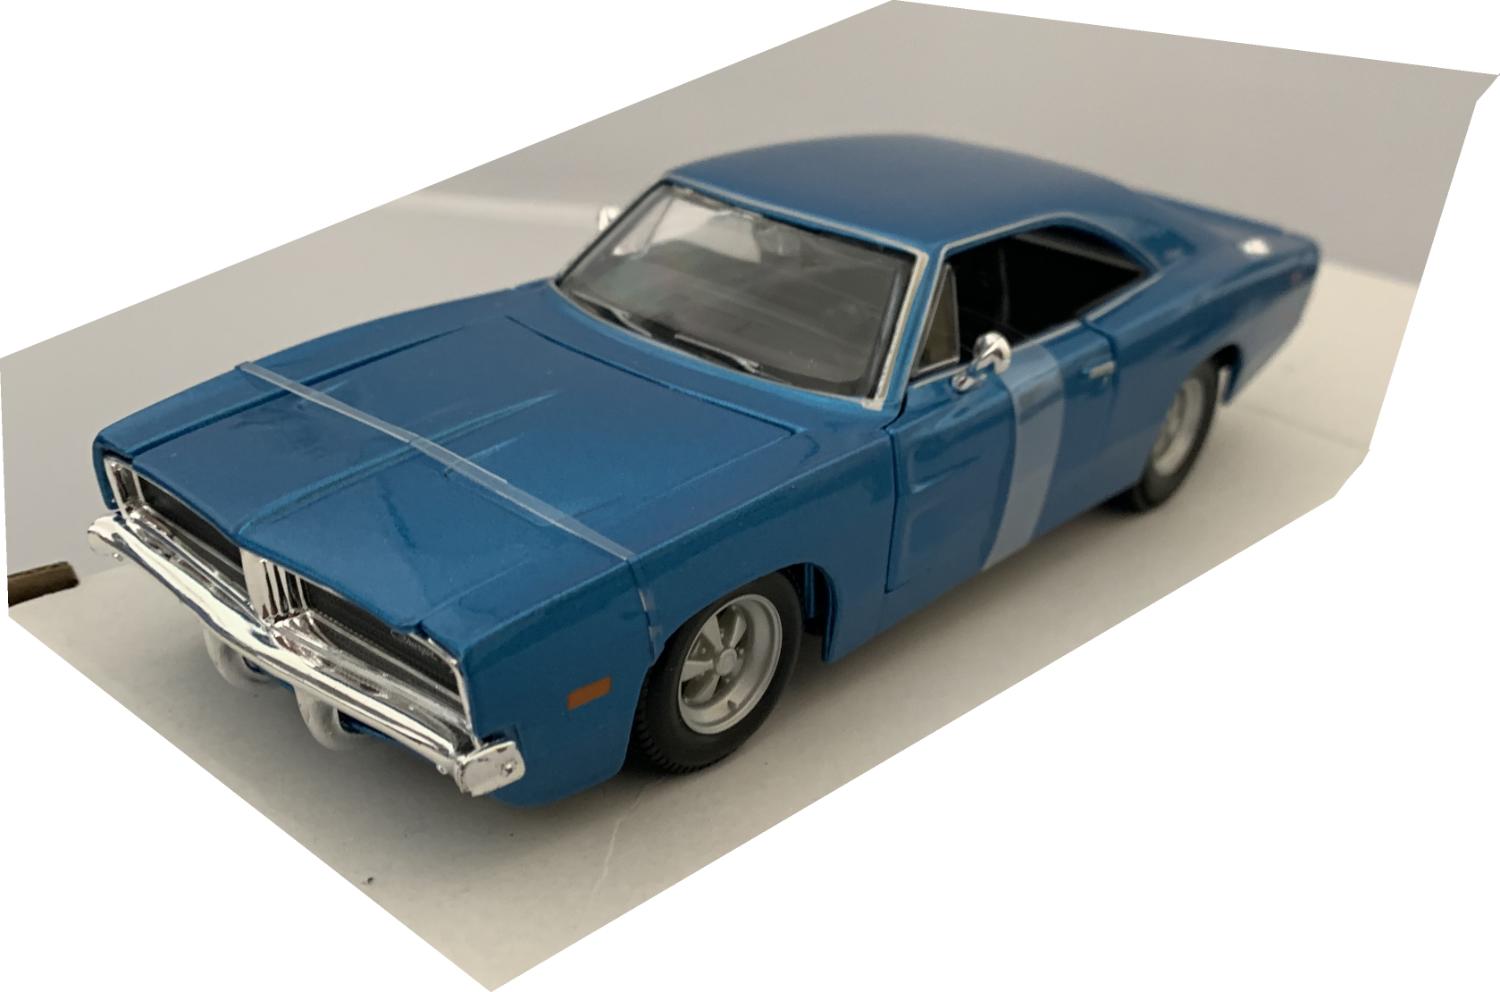 Dodge Charger R/T 1969 in bright blue 1:25 scale model from Maisto, 31256B